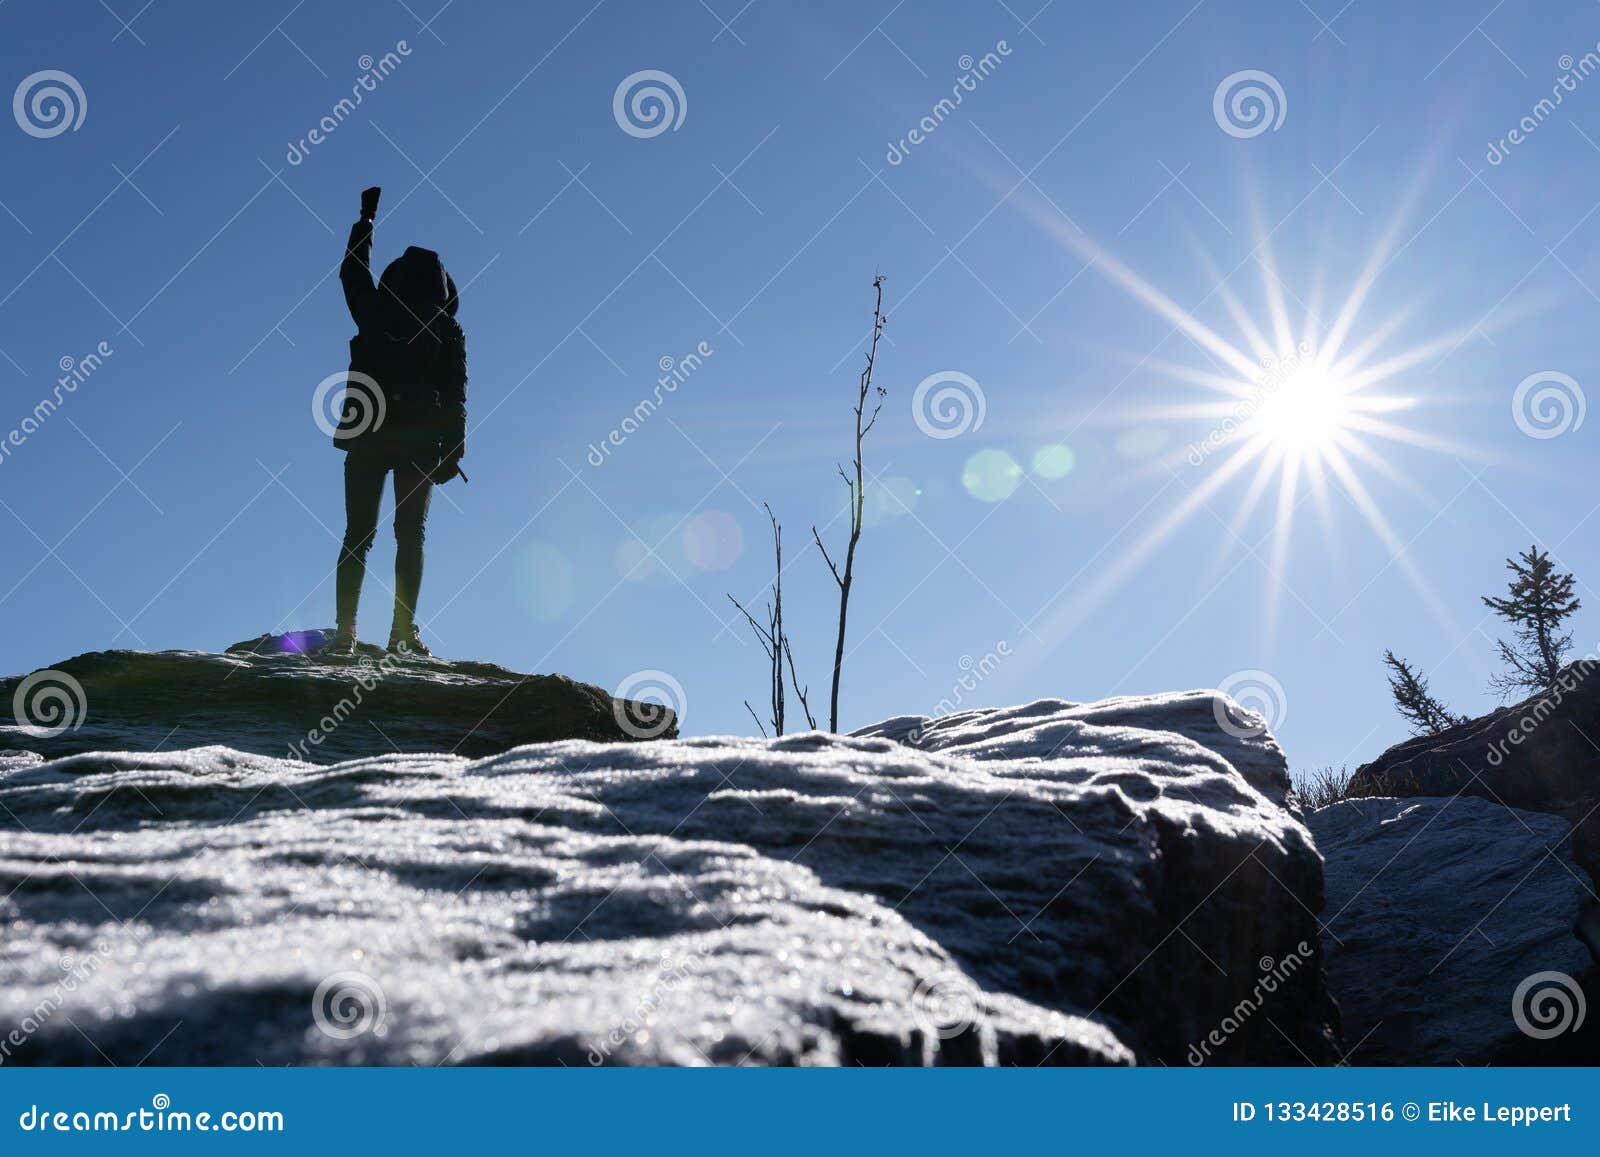 cheering woman hiker open arms at mountain peak backlit with heavy lensflare and ice crystalls in the foreground.